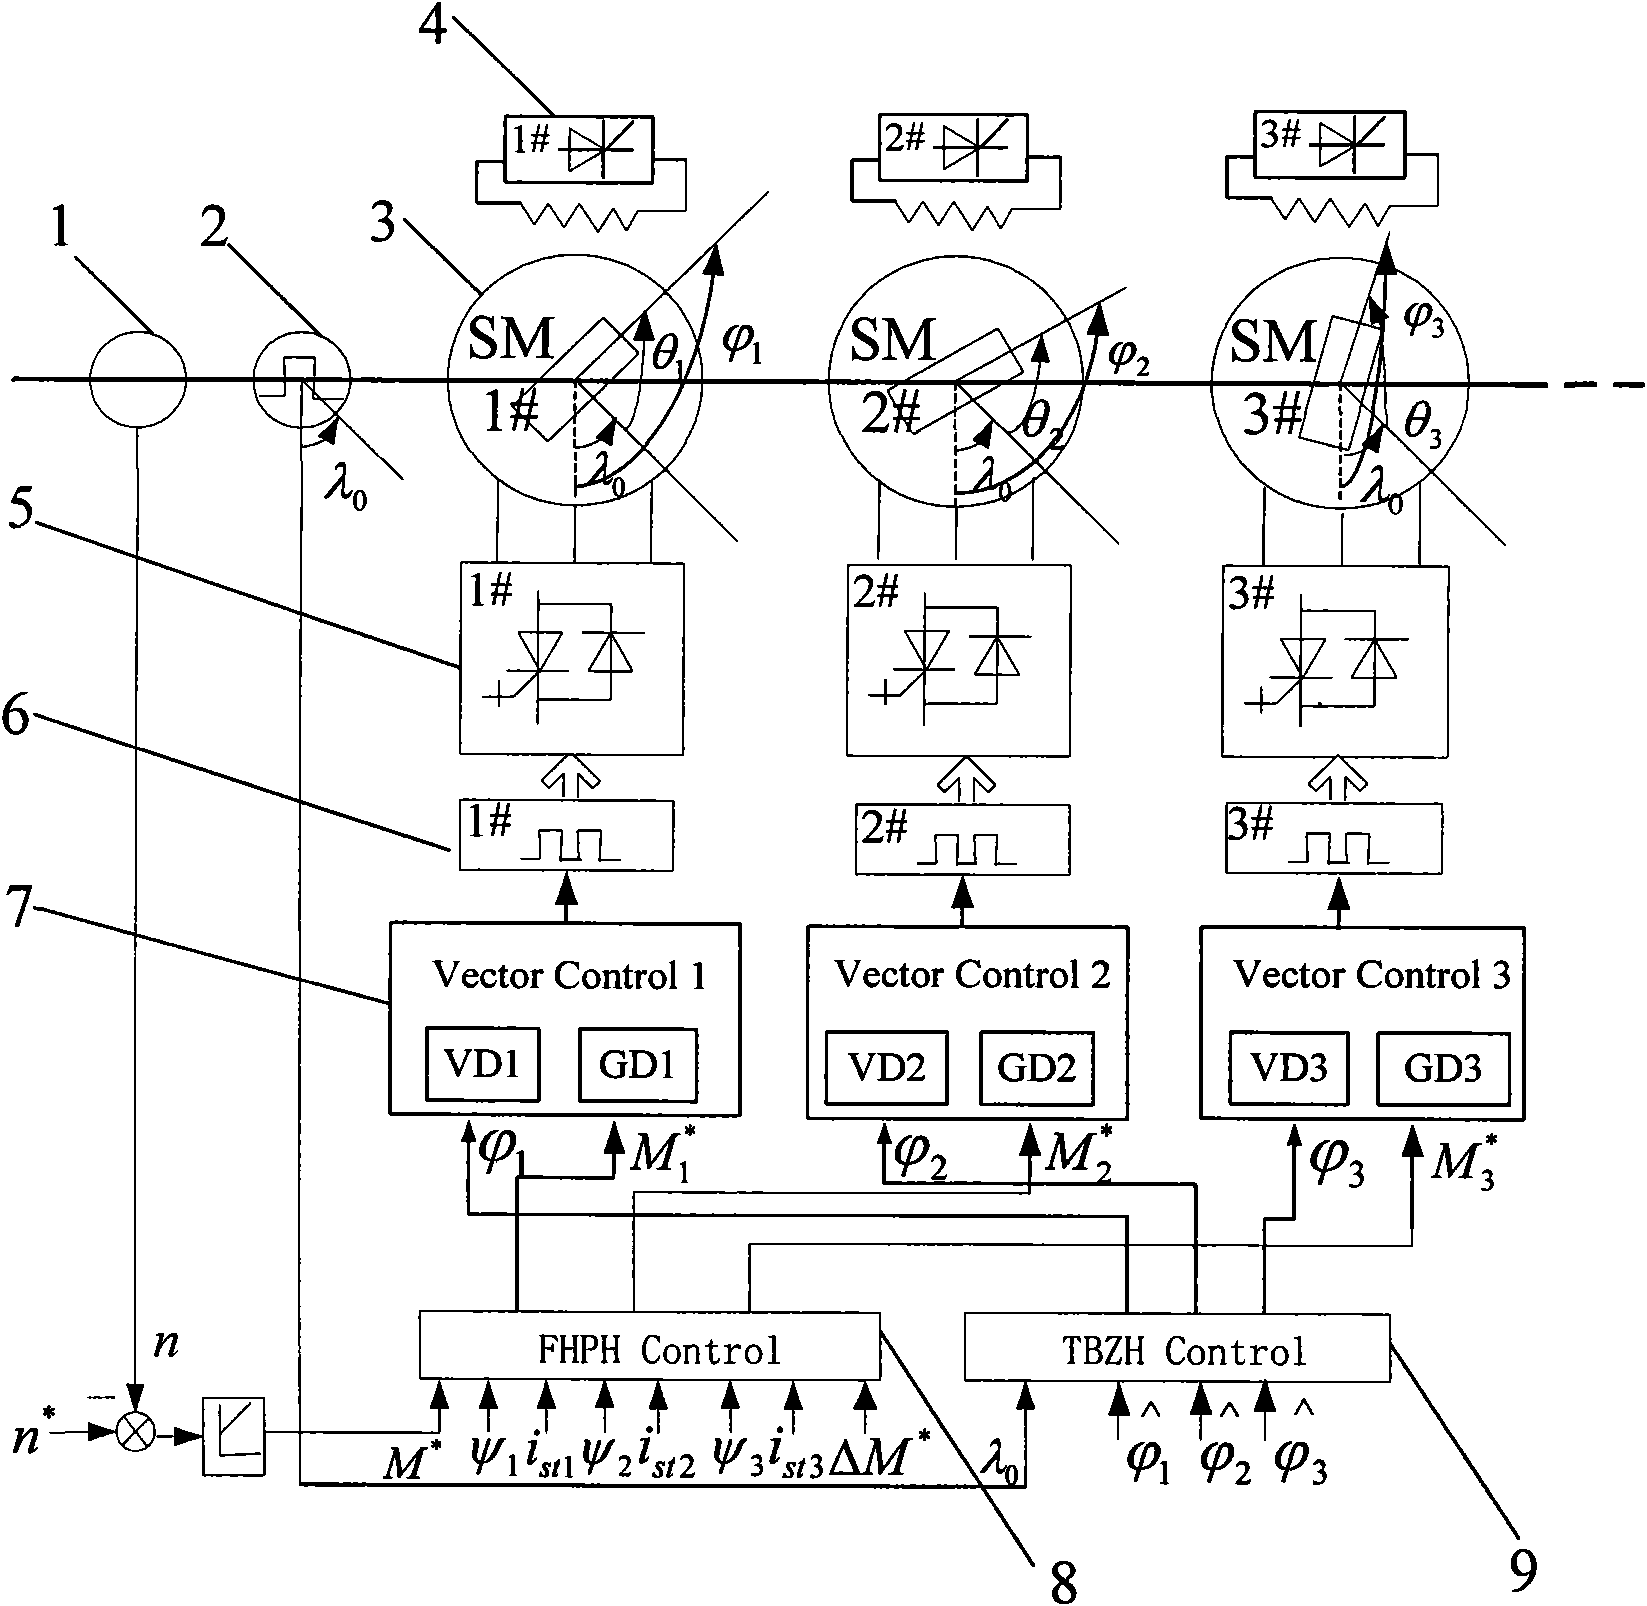 Synchronous and load balancing control system for series operation of a plurality of alternating-current synchronous motors